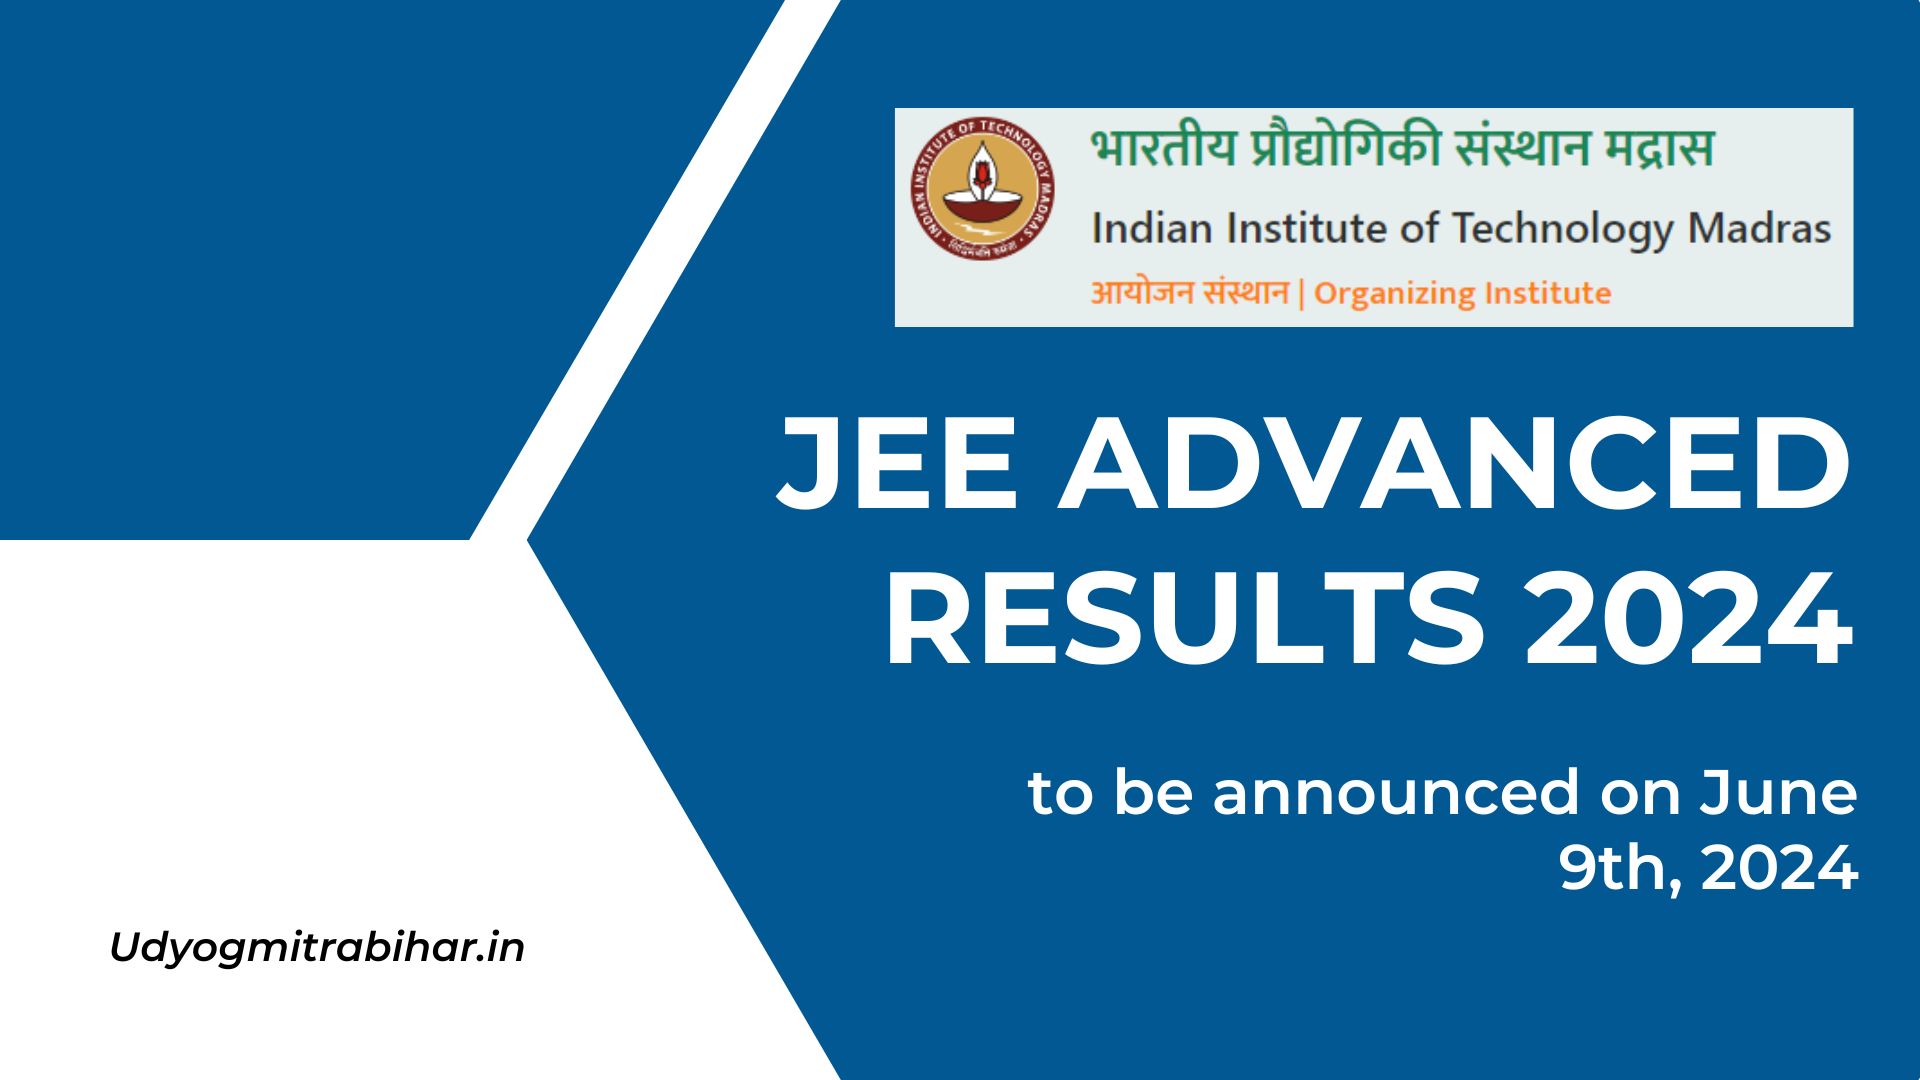 Check the JEE Advanced Results 2024, Merit List, Ranking Policies